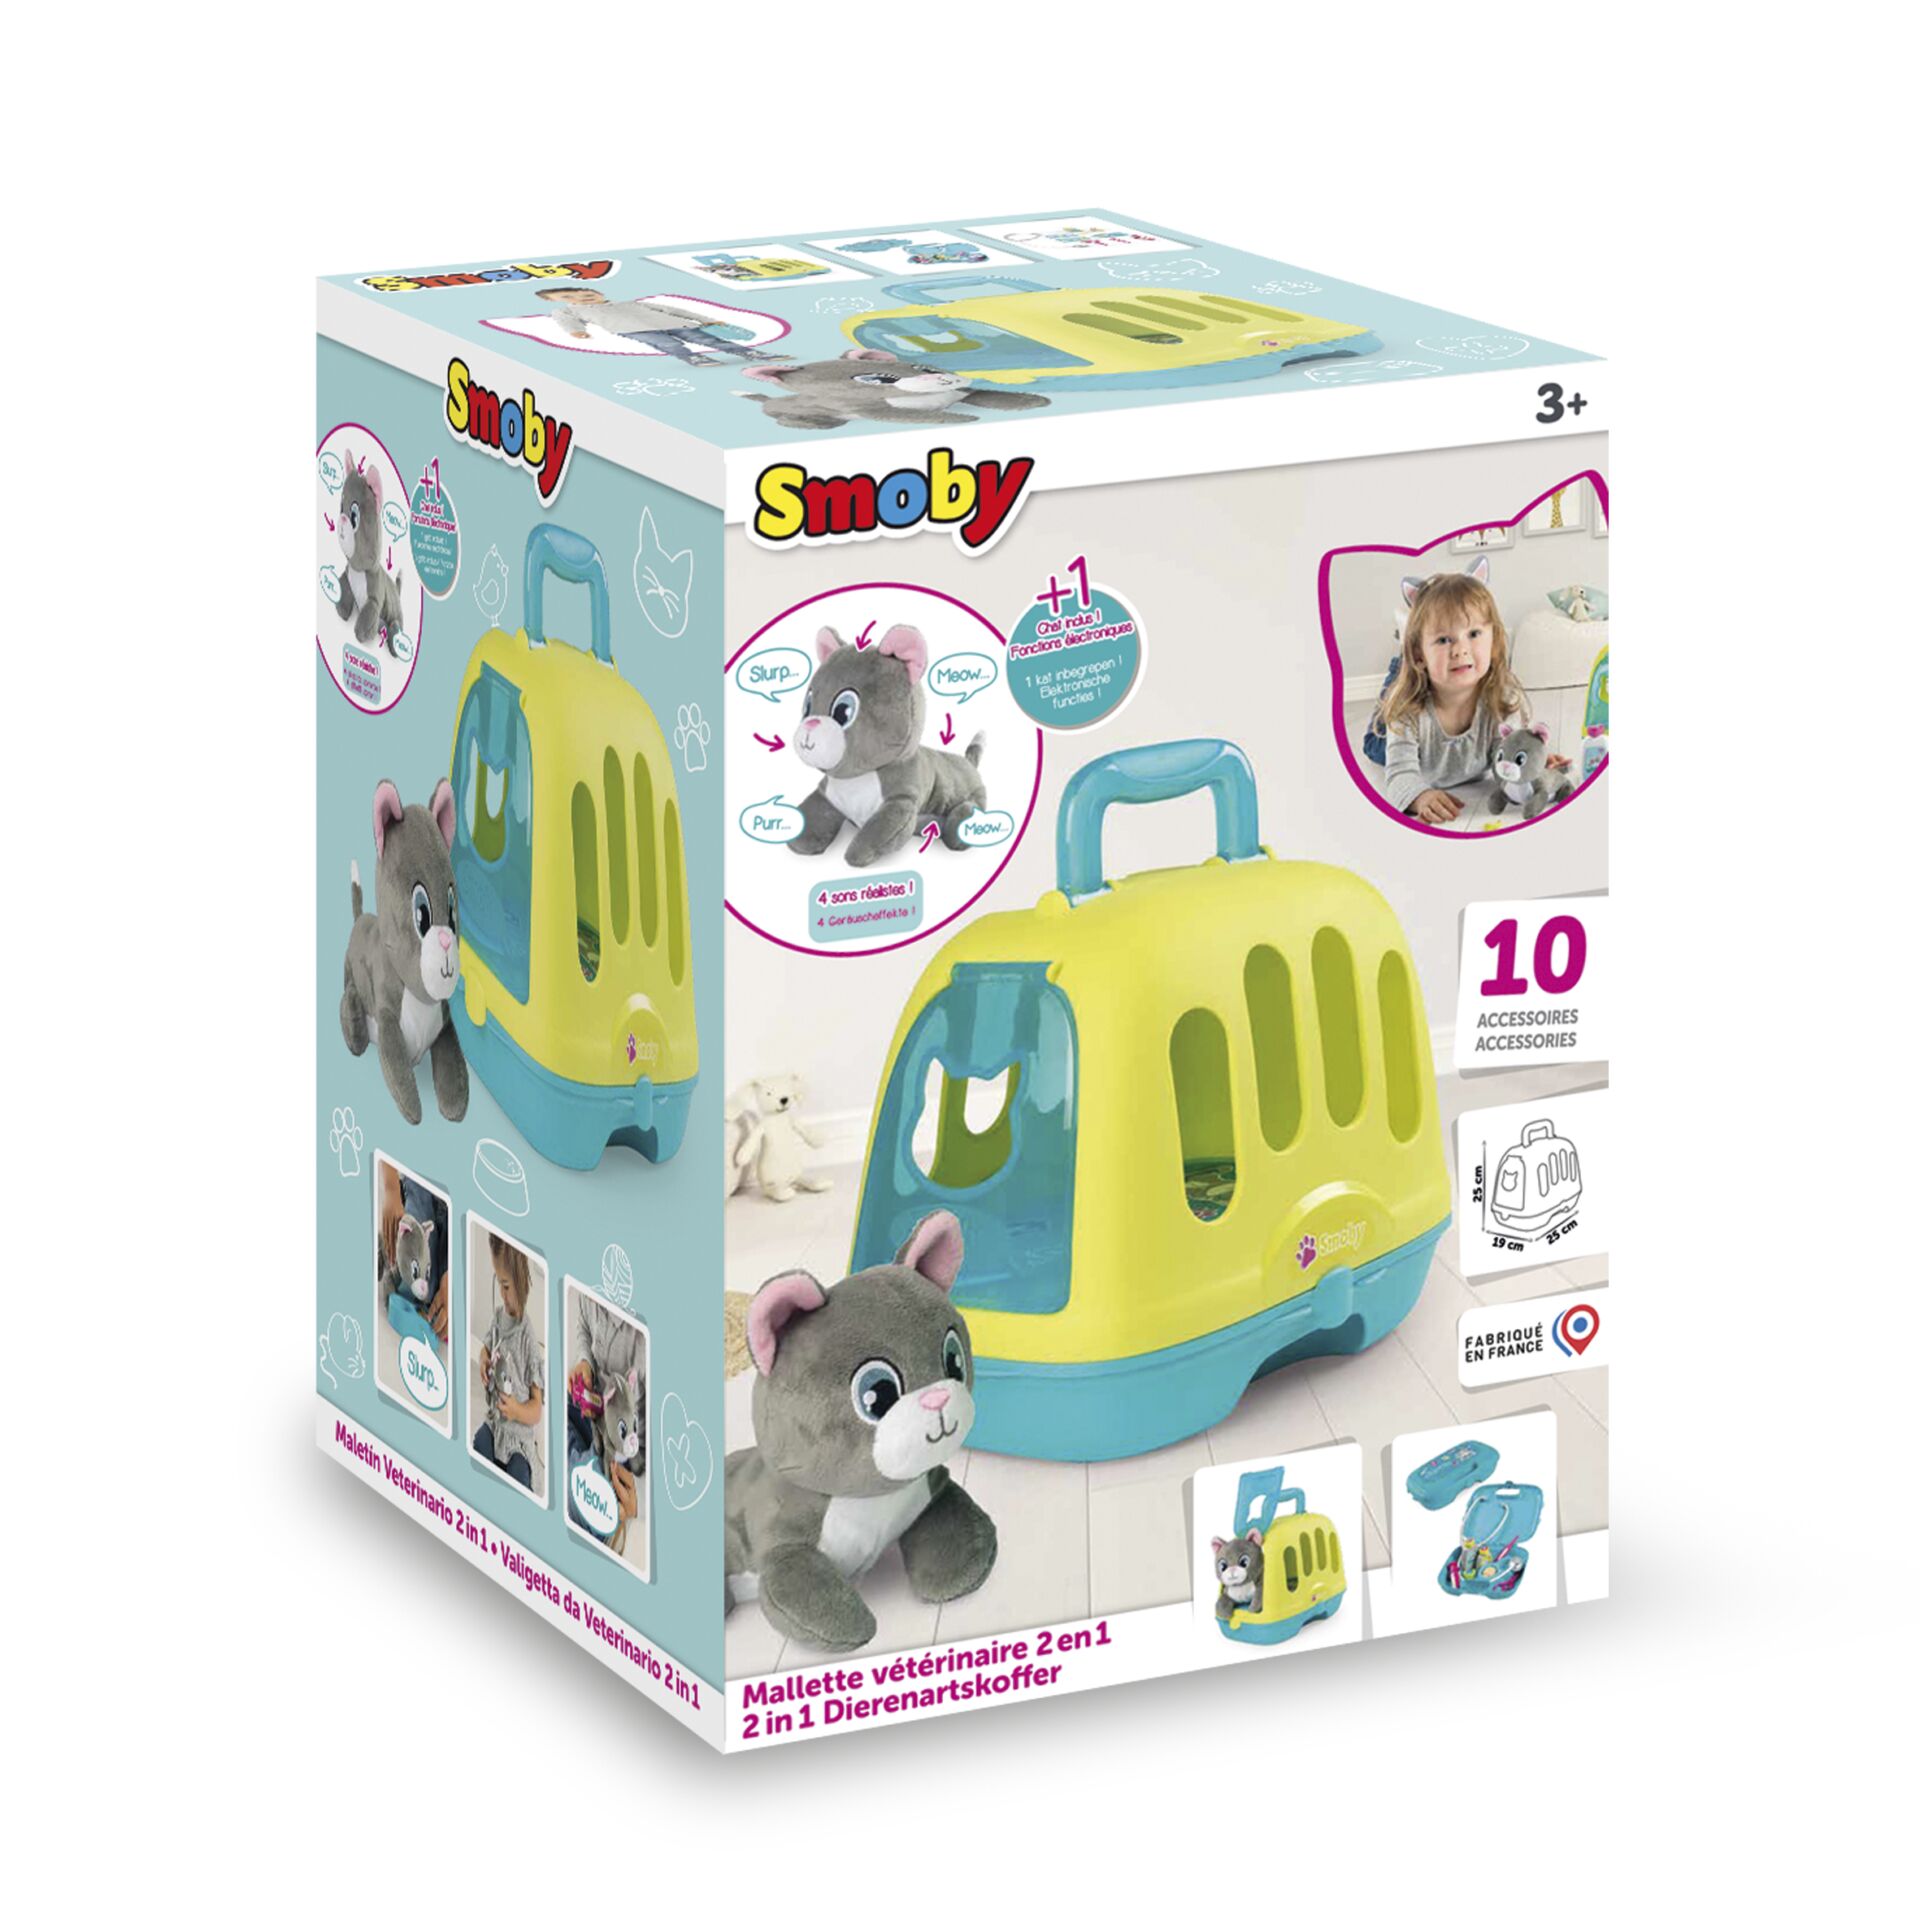 Smoby Tierarzt Spielset im Koffer               Modell 2022